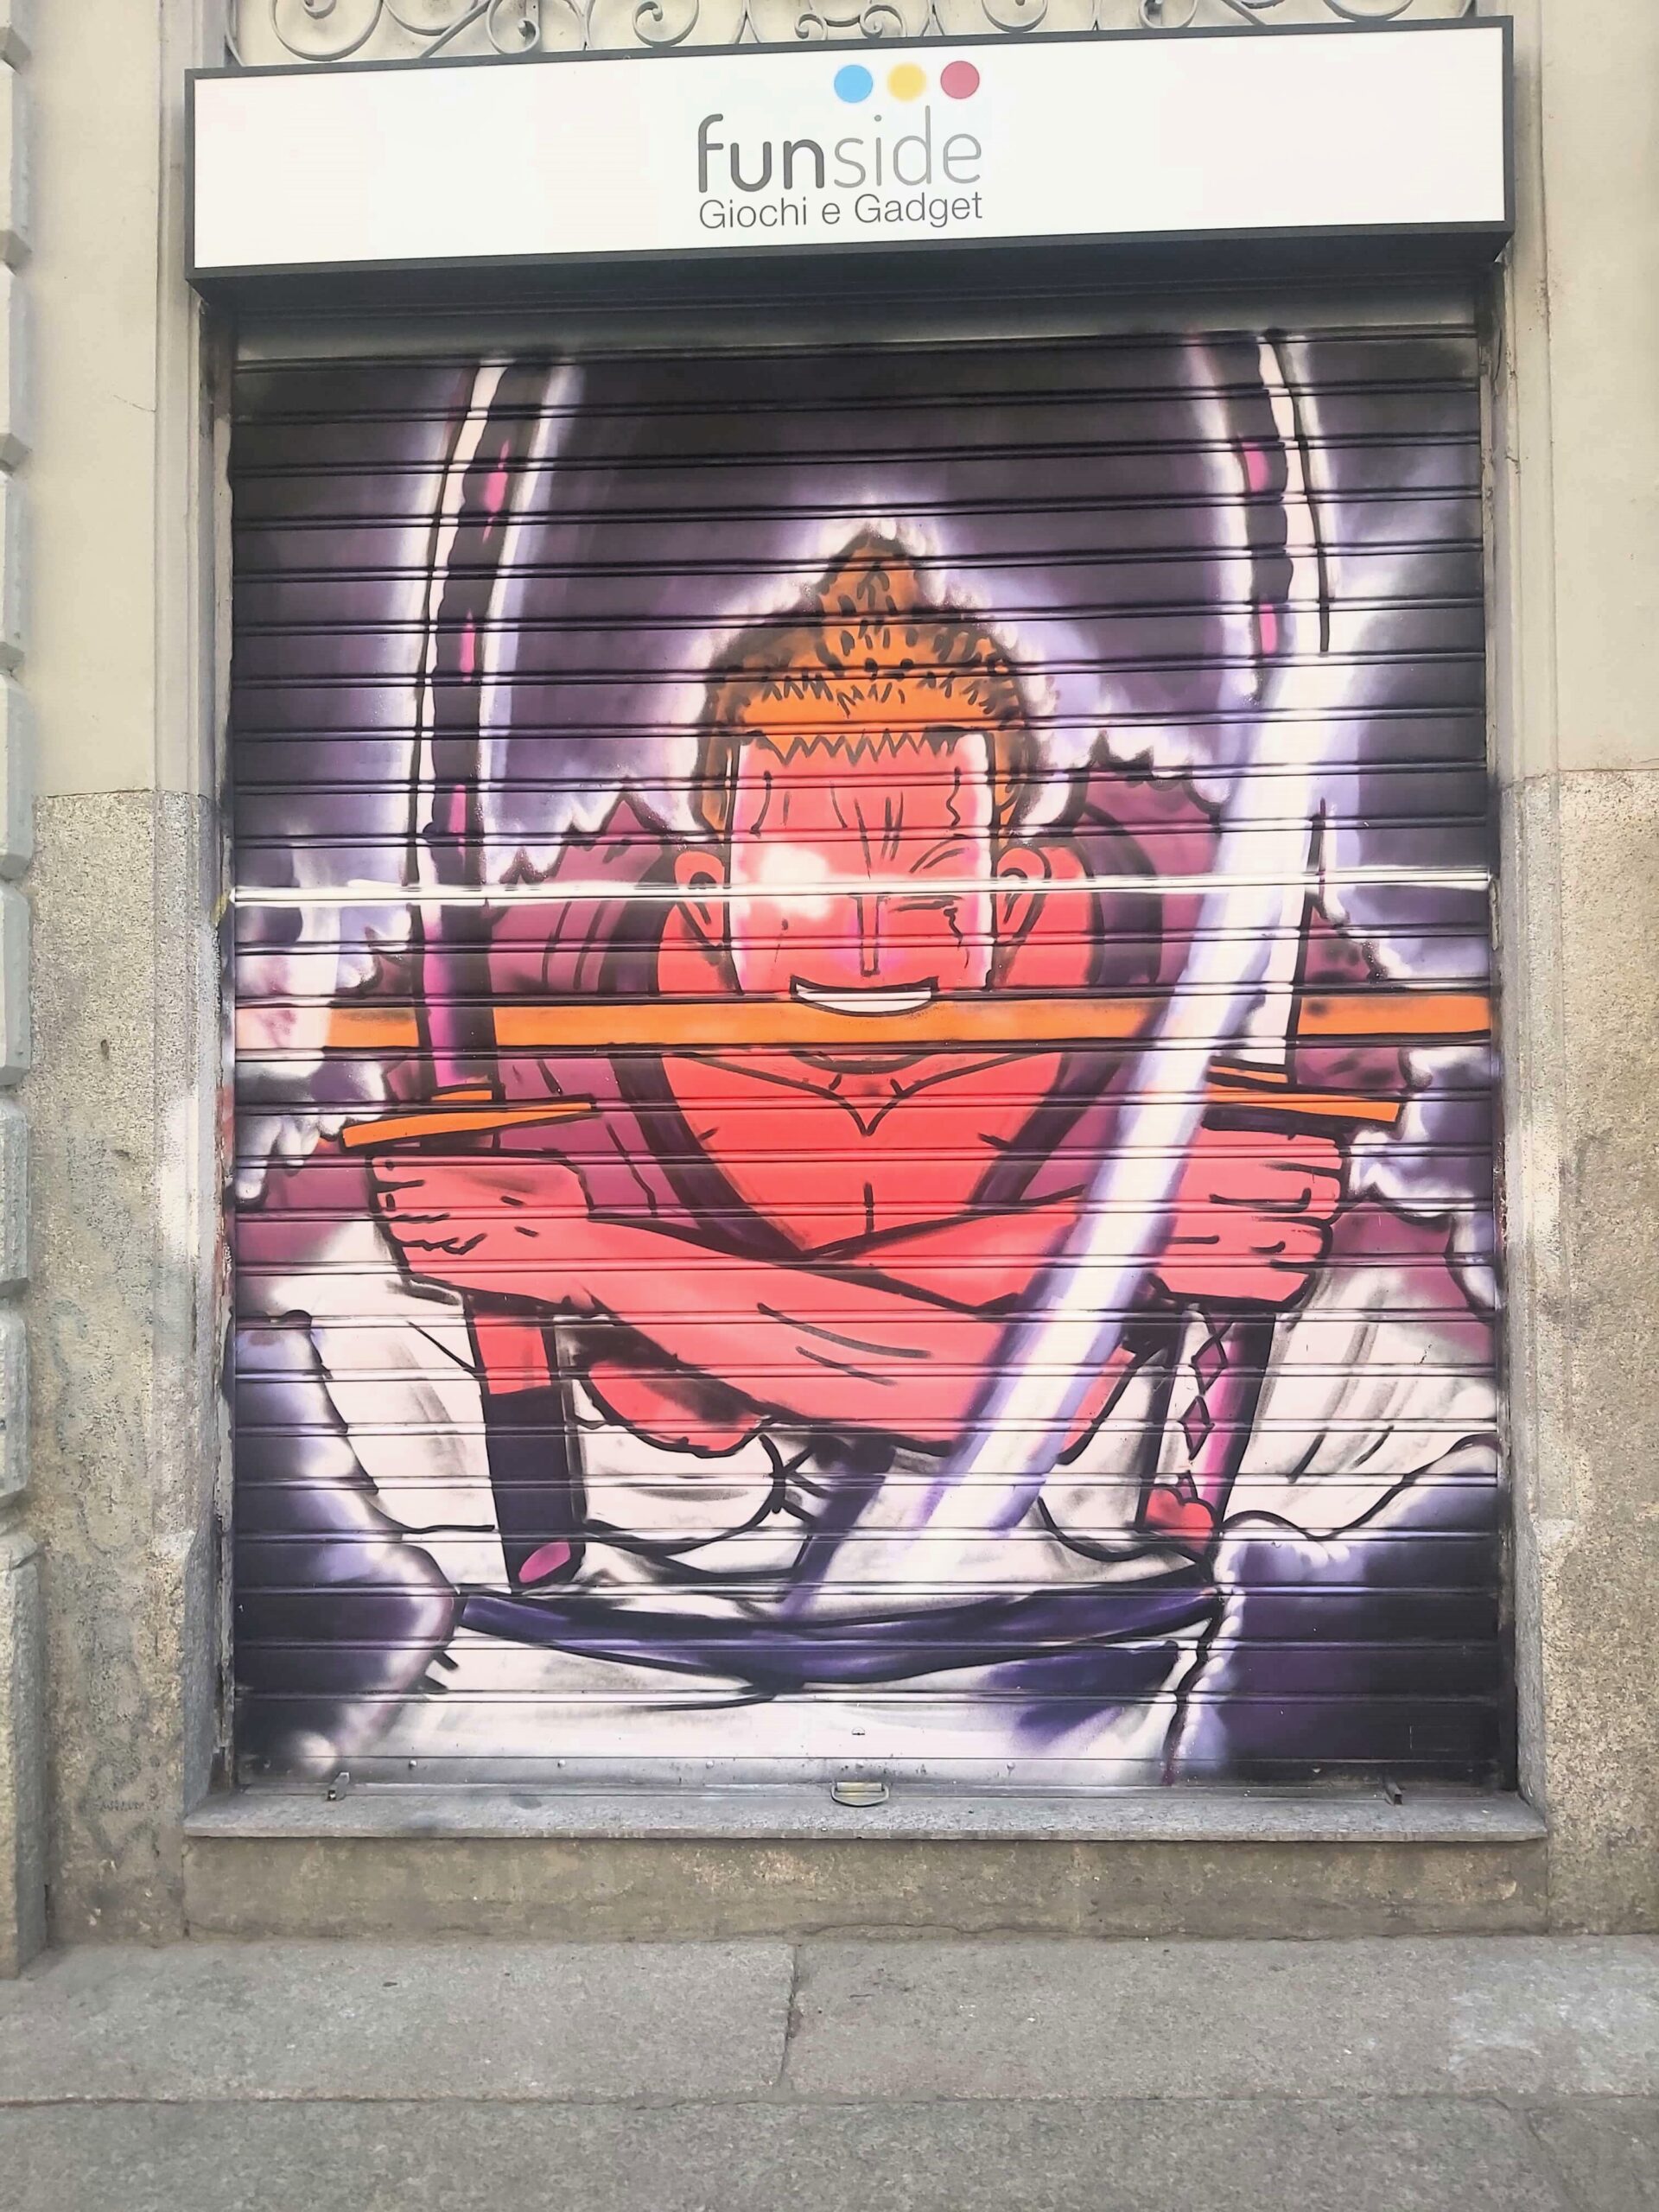 A graffiti image of a cartoon character with swords in Milan, Italy